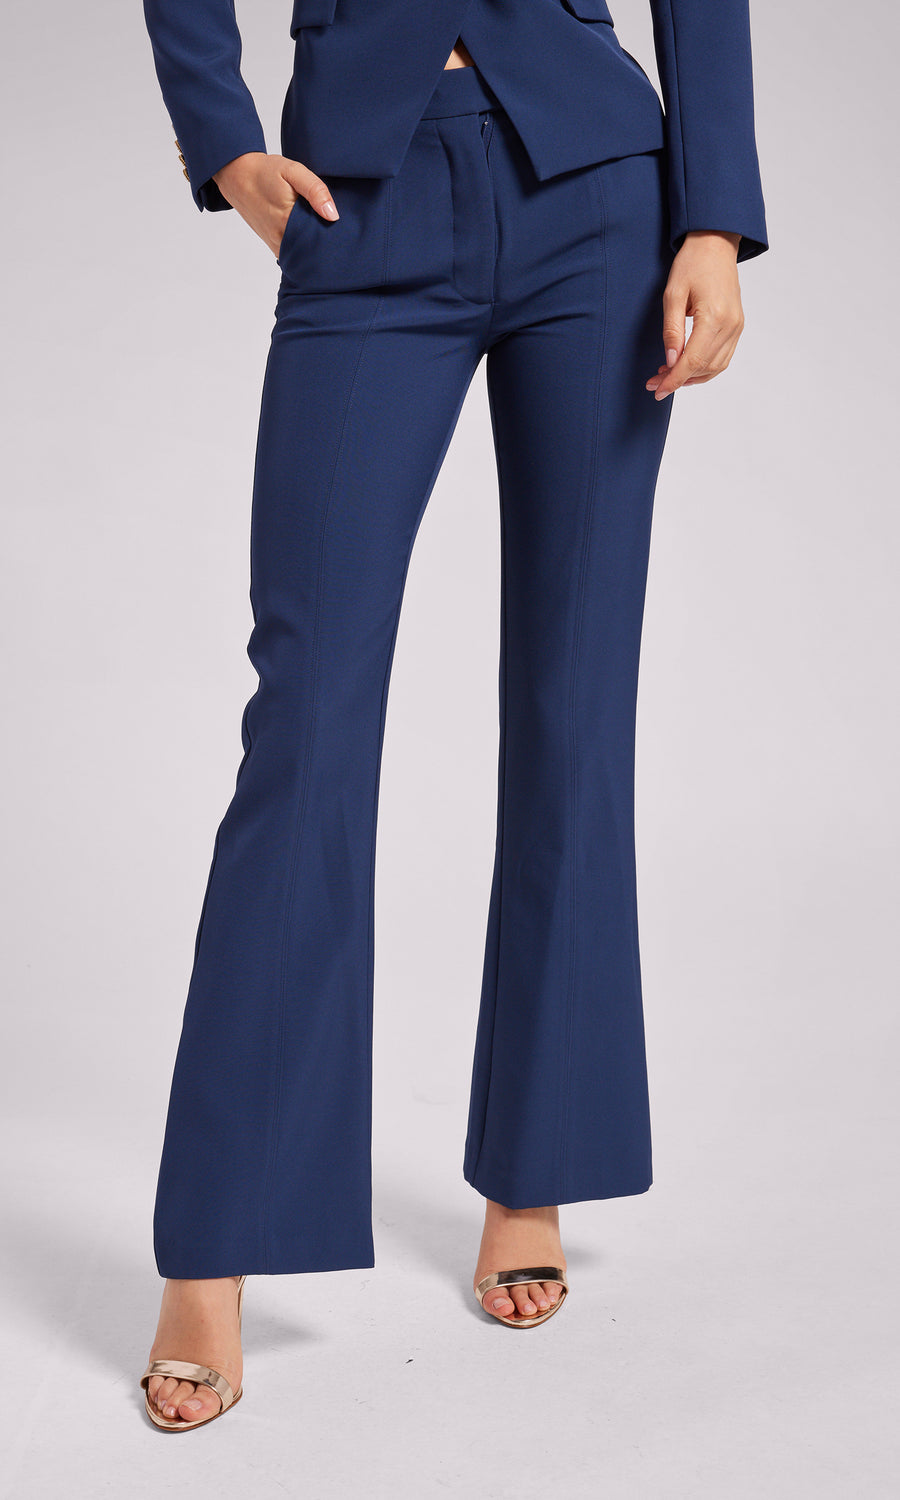 Lucca Crepe Pants - Navy 